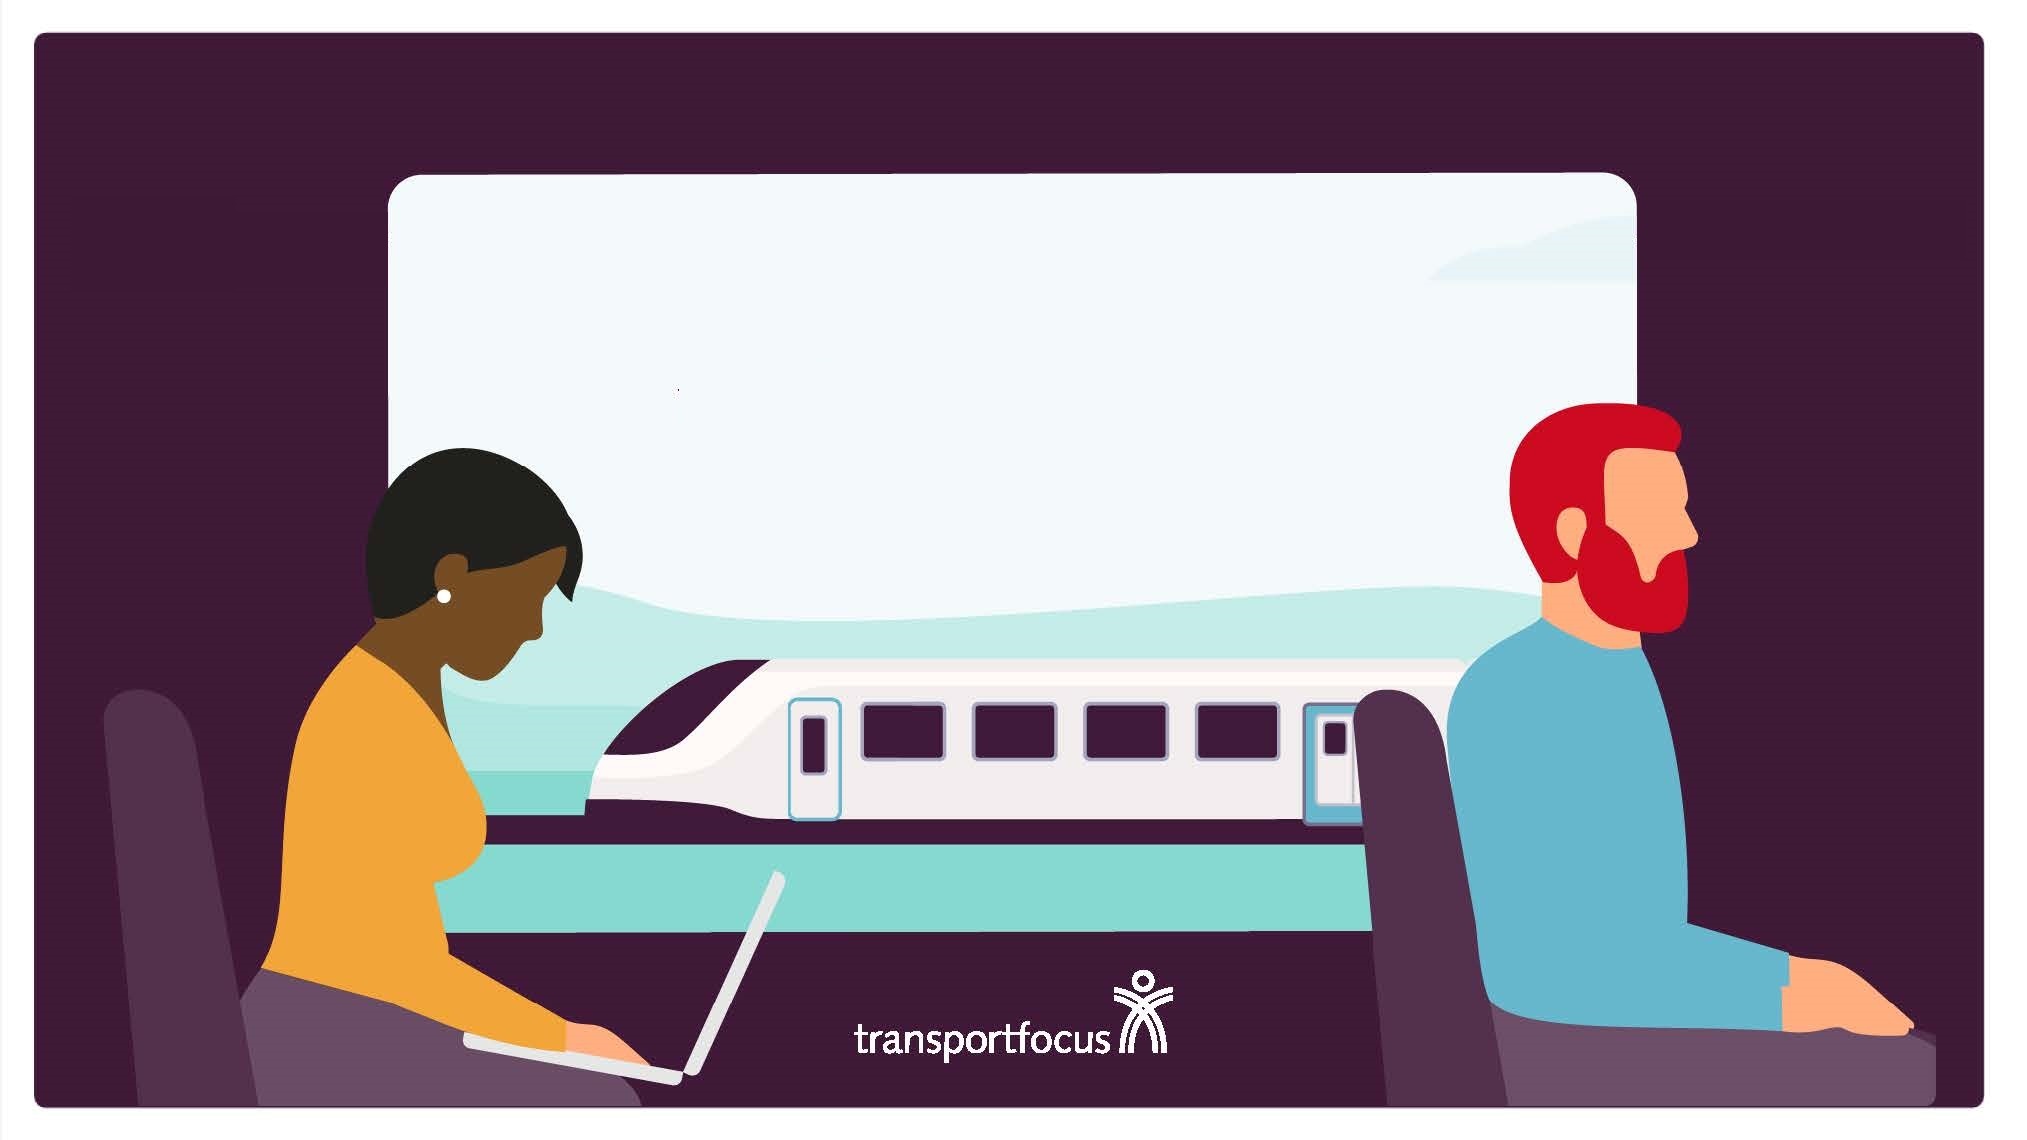 Graphic of passengers sitting on a train.